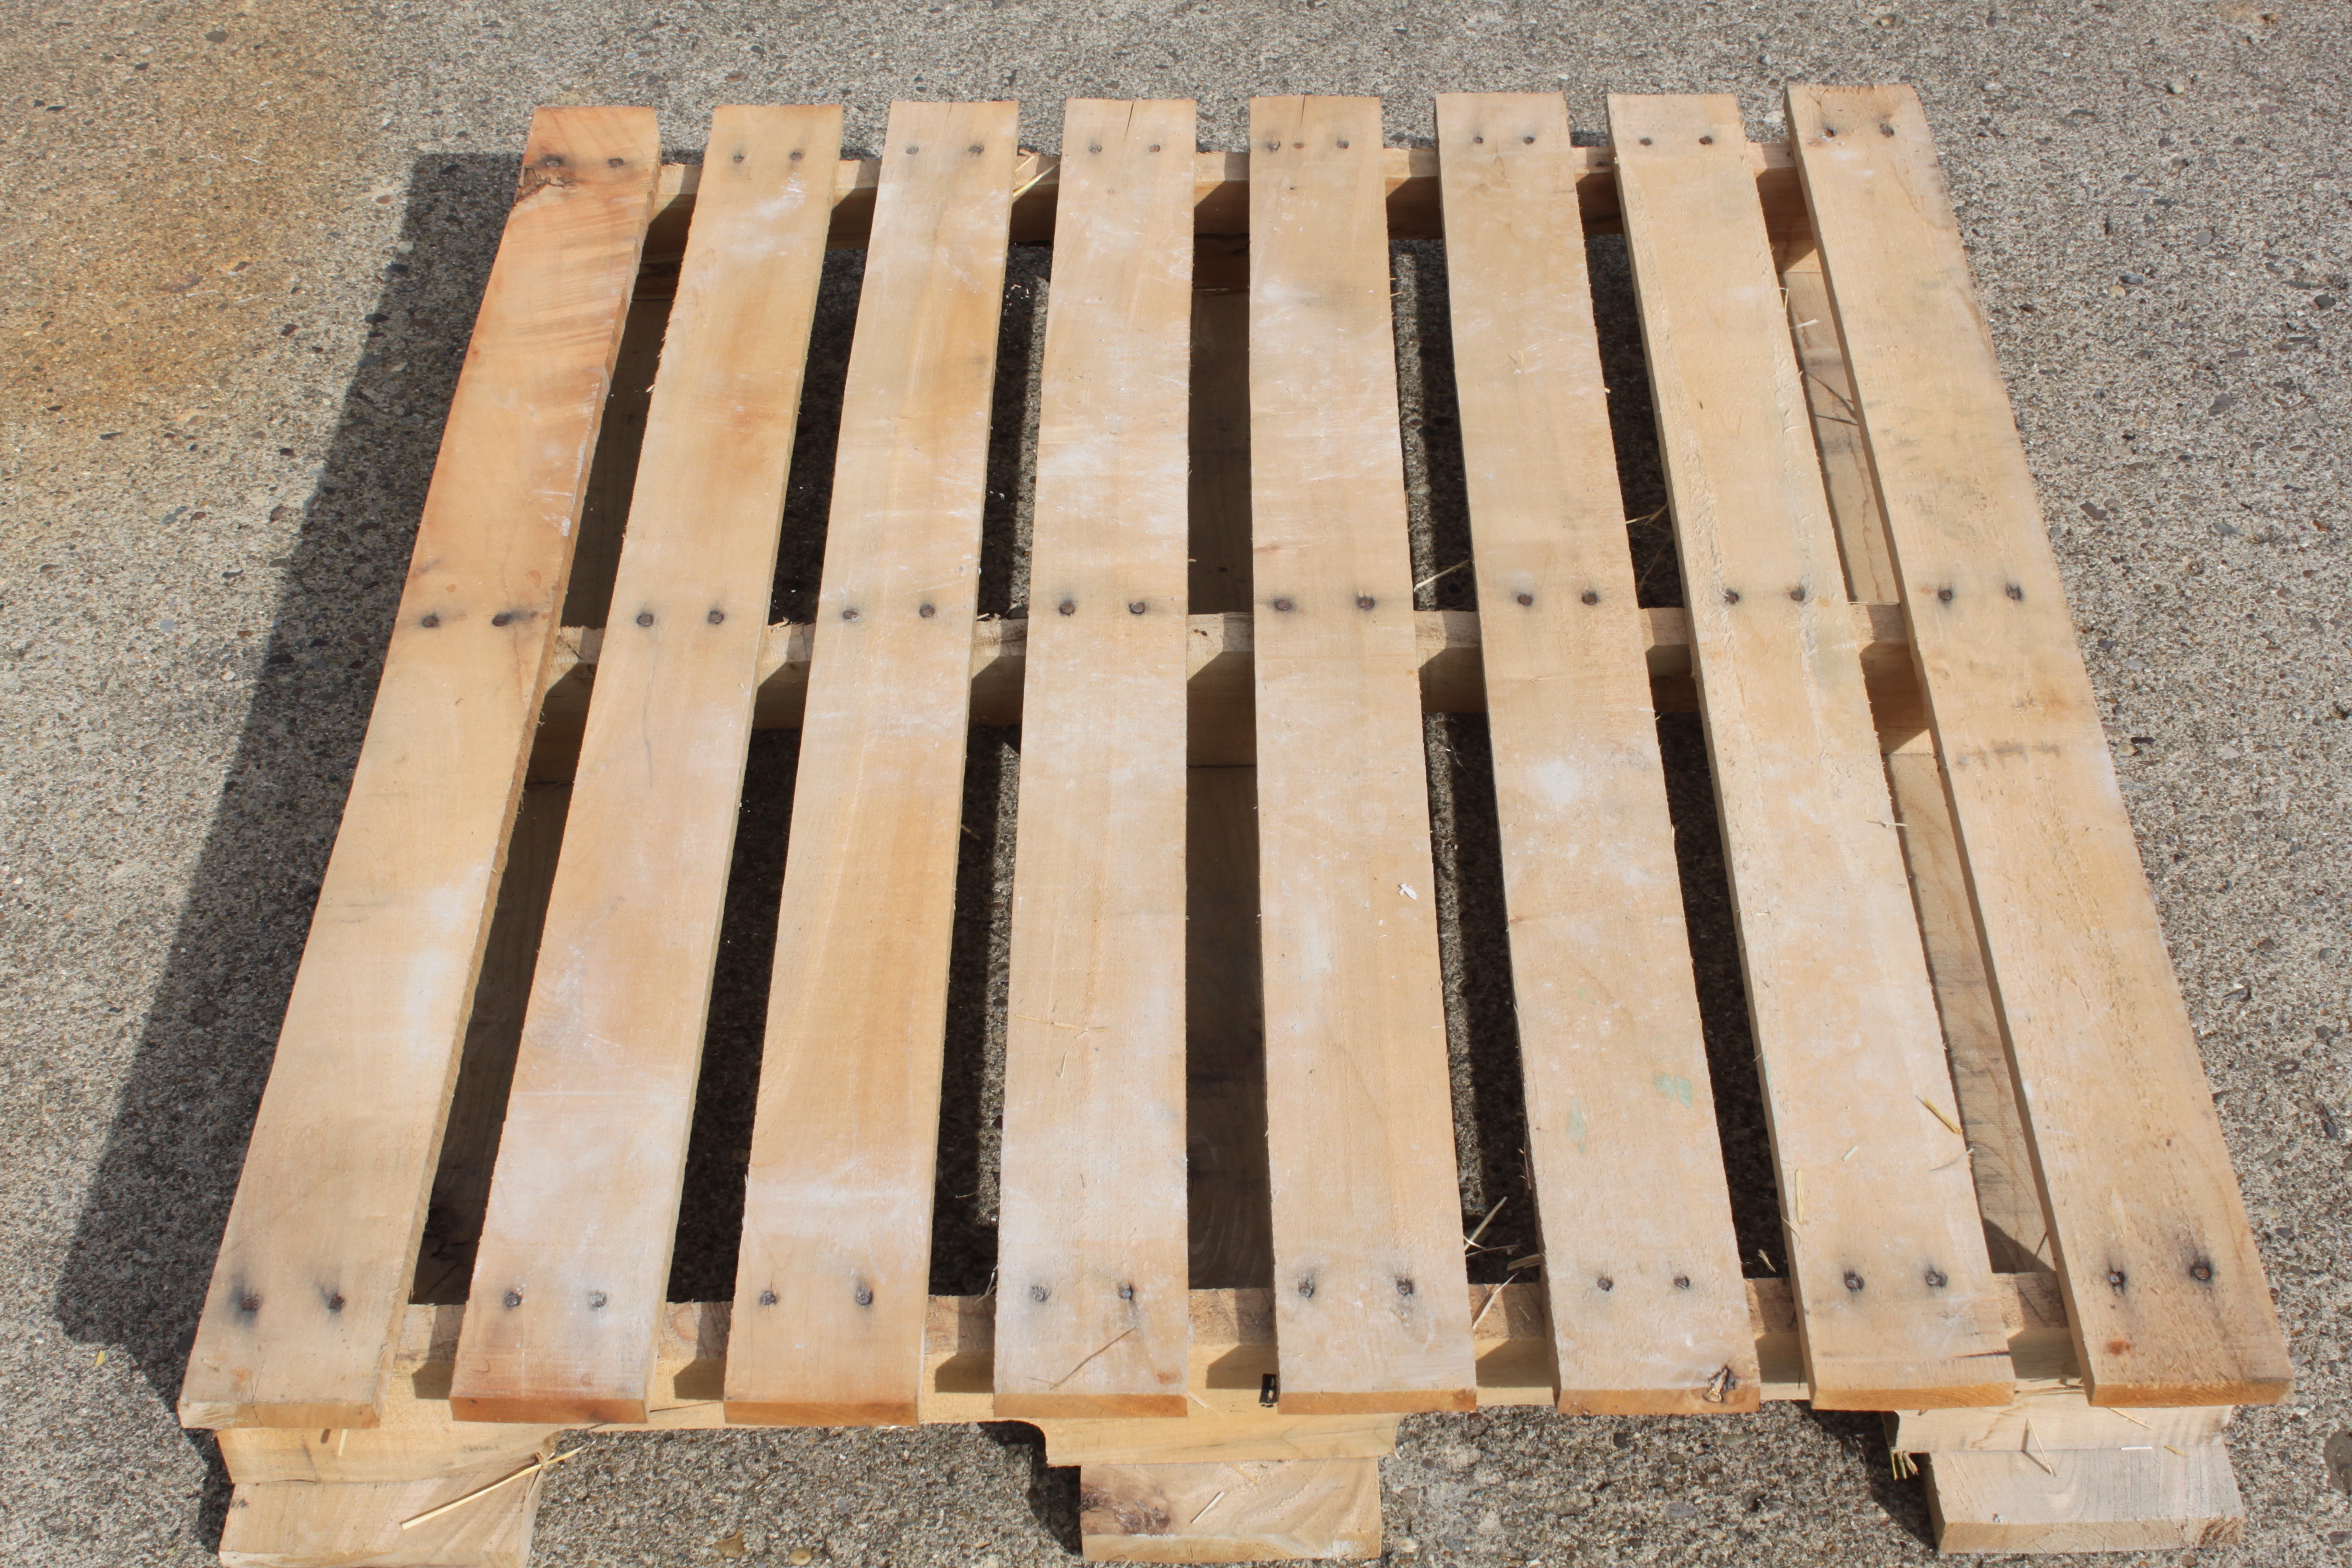  Pallet With Ease For Great Building Projects | Old World Garden Farms